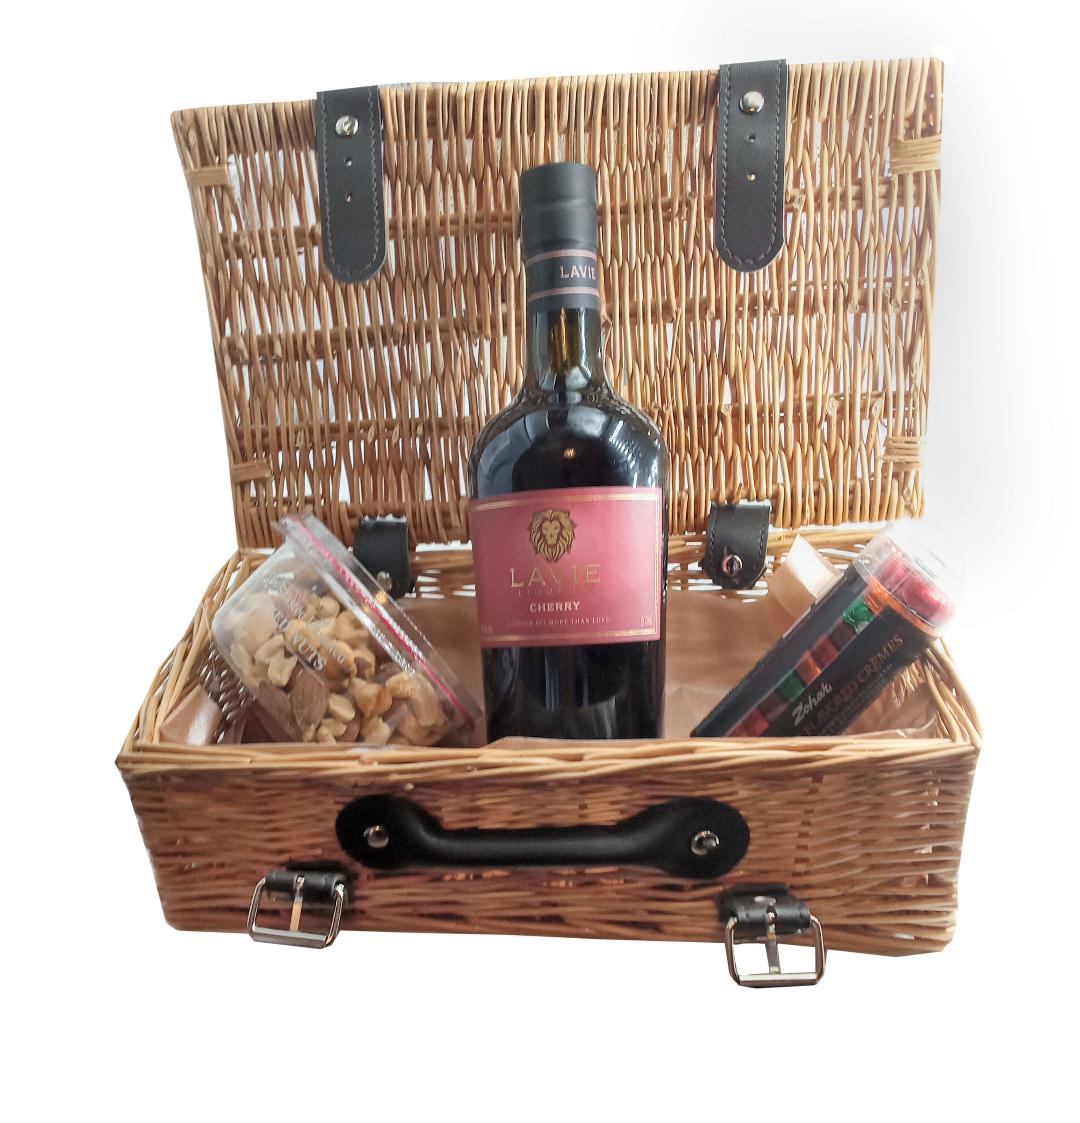 Food Hamper With LAVIE Cherry Liqueur In A Wicker Hamper With Assorted Nuts And Cremes. Gluten-Free & Vegan. Ideal For Purim And for Any Occasion. Gift Wrapped And Delivered Golders Green, Hampstead An Throughout The UK